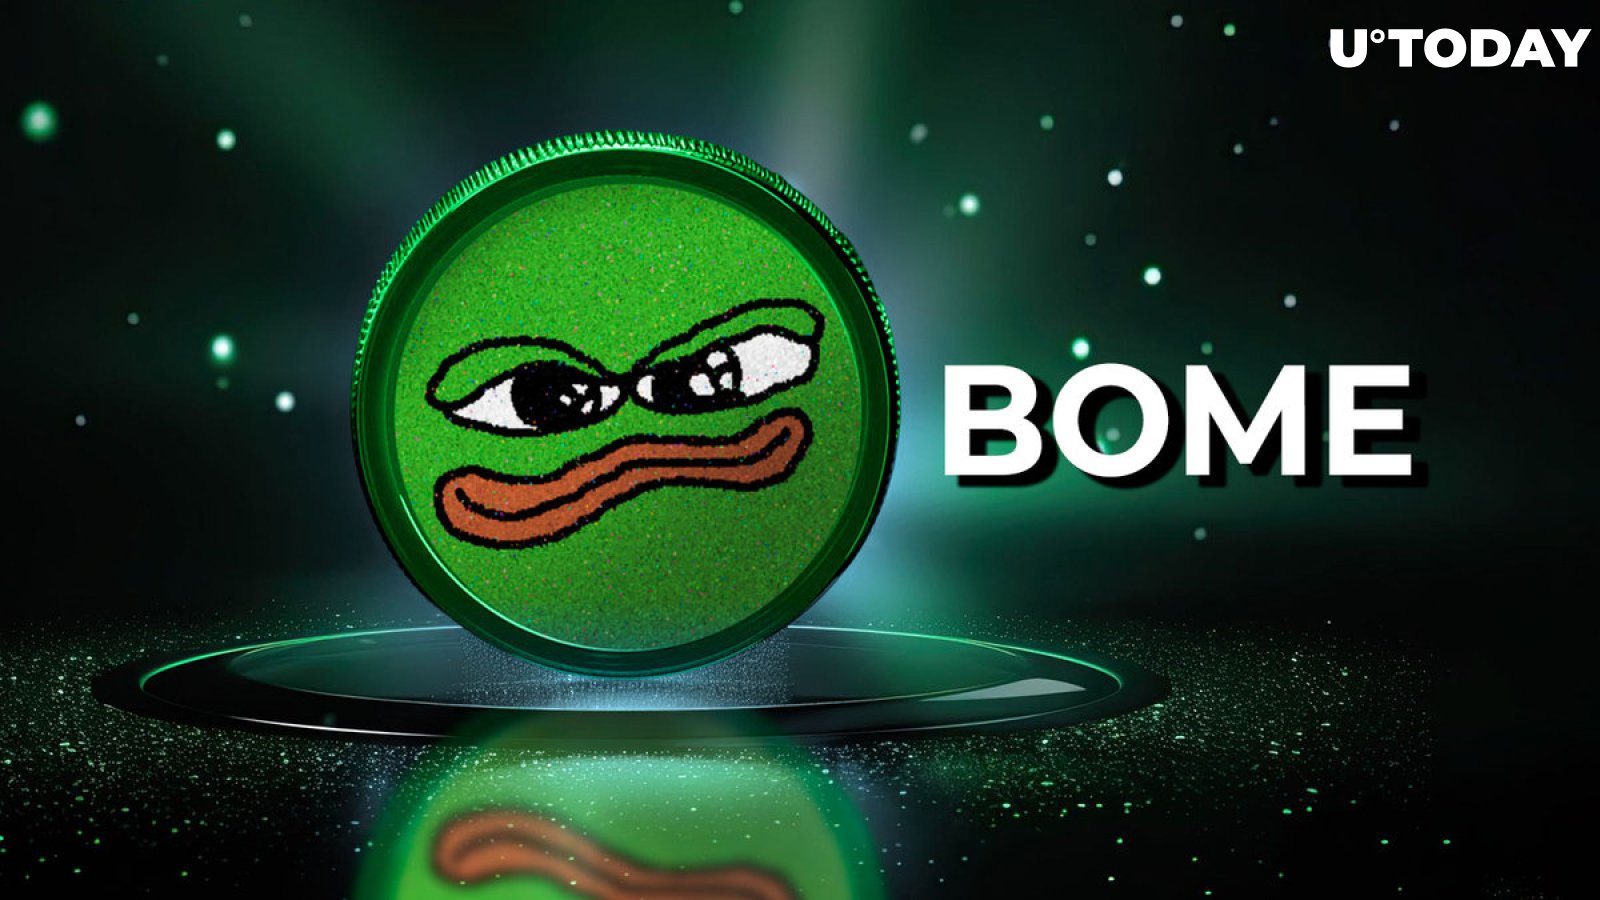 BOOK OF MEME (BOME) Up to 300%, will it surpass PEPE and BONK?